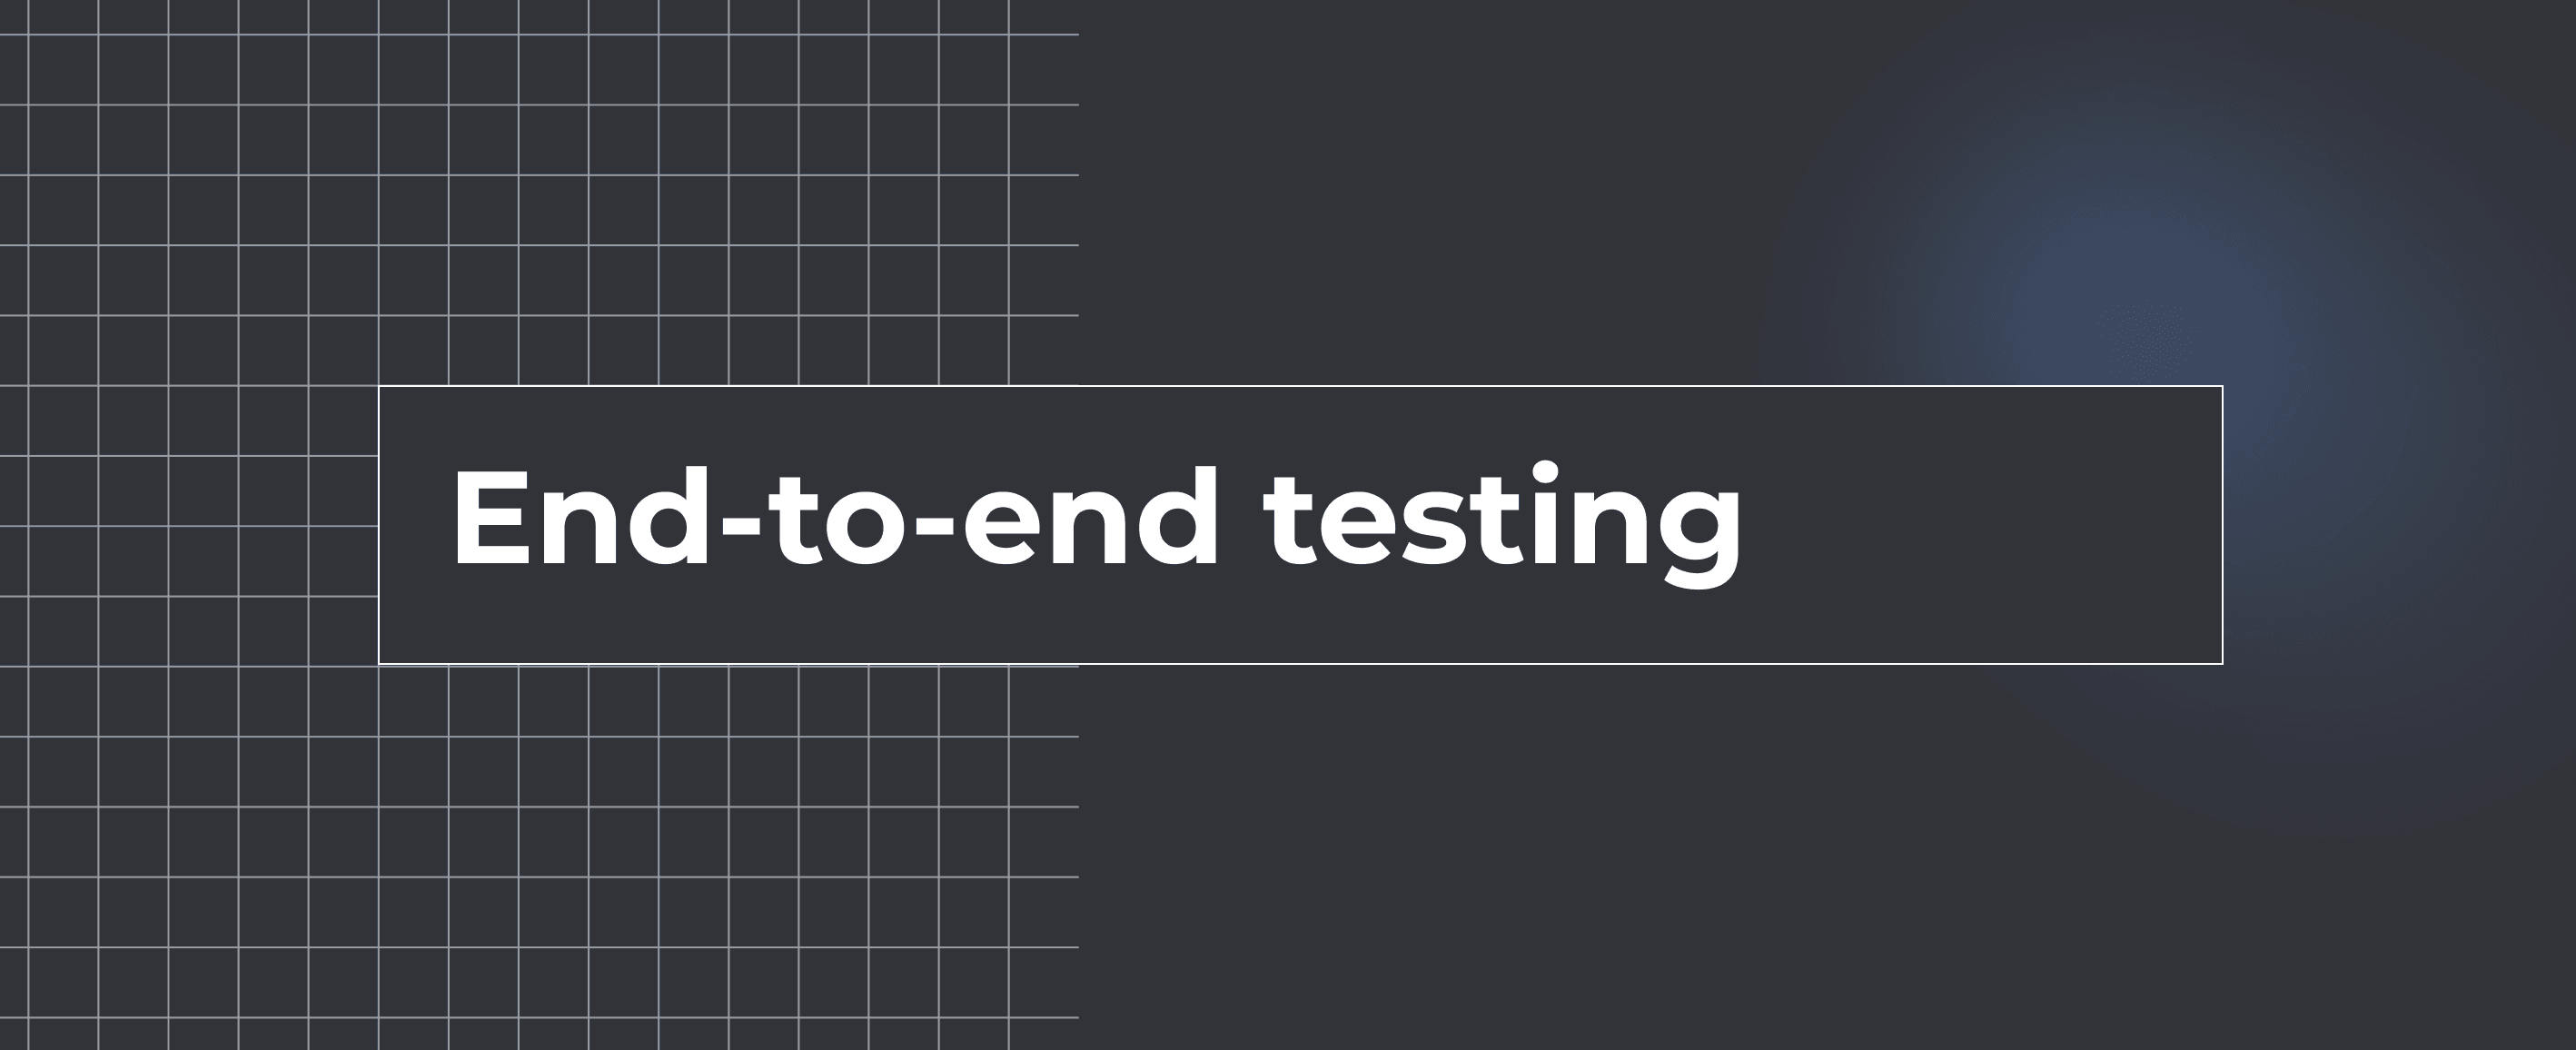 End-to-endTesting